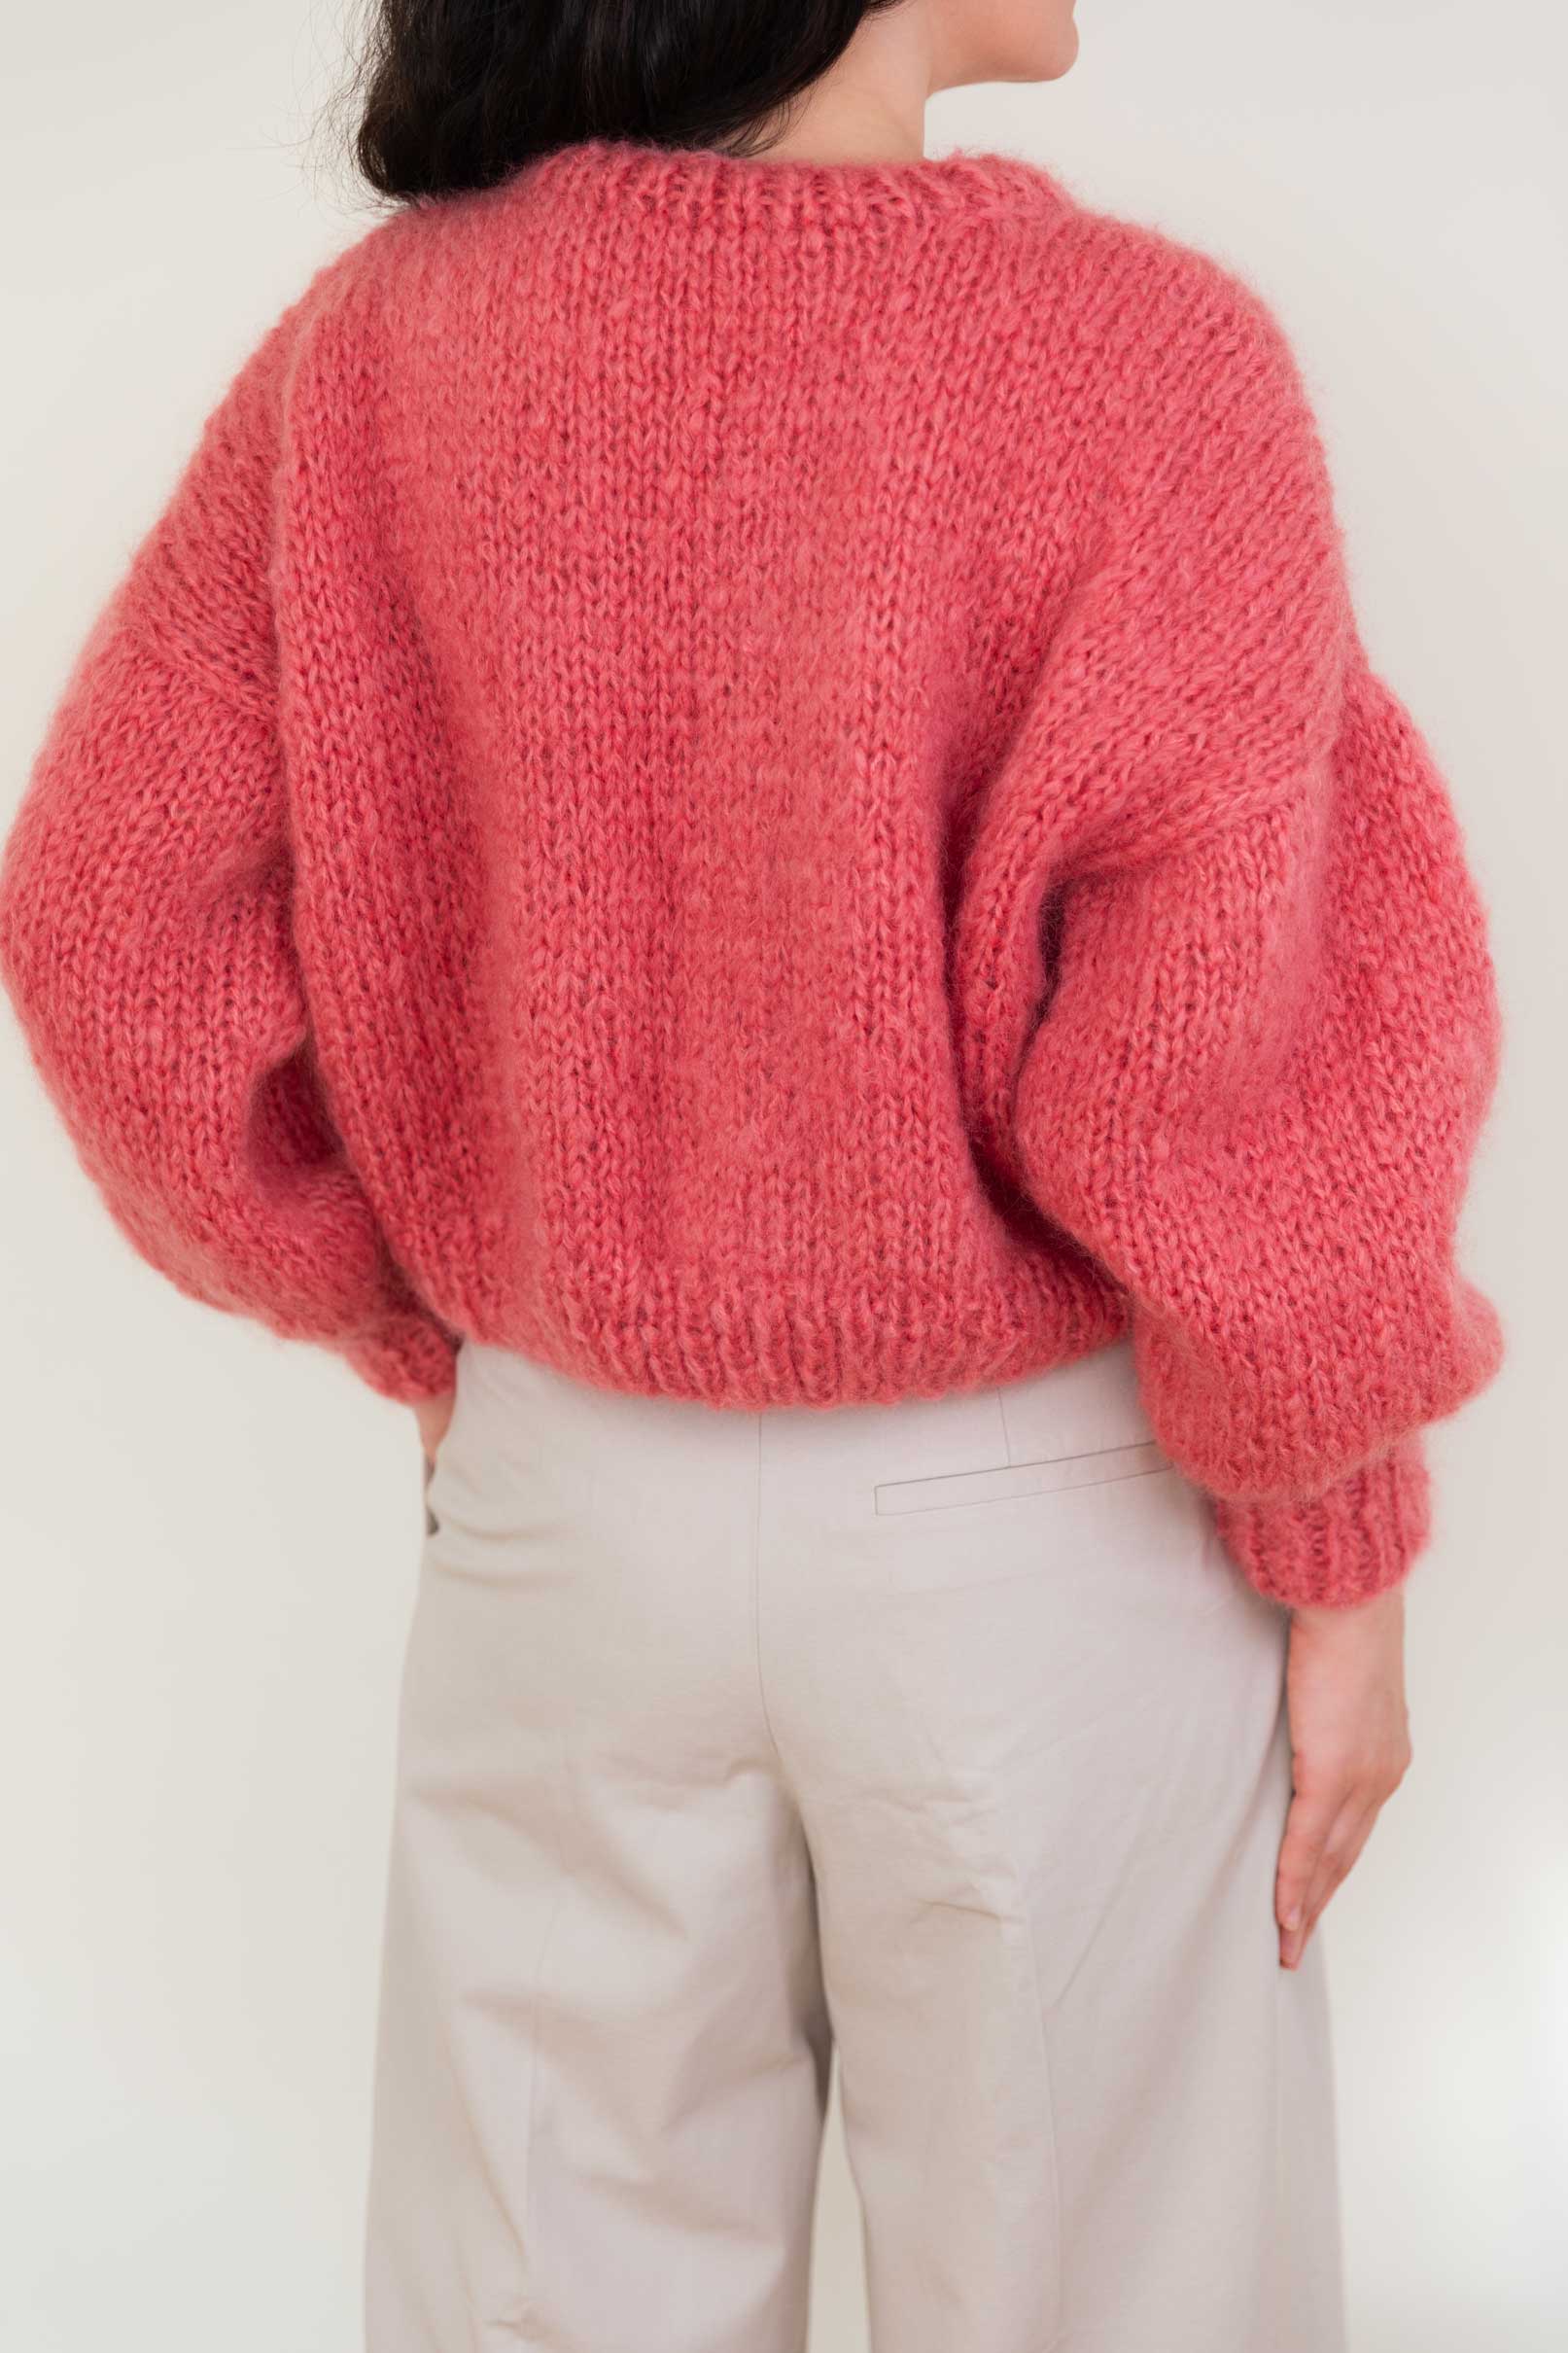 Pink Mohair and Organic wool sweater, oversized fit and a boxy shape.